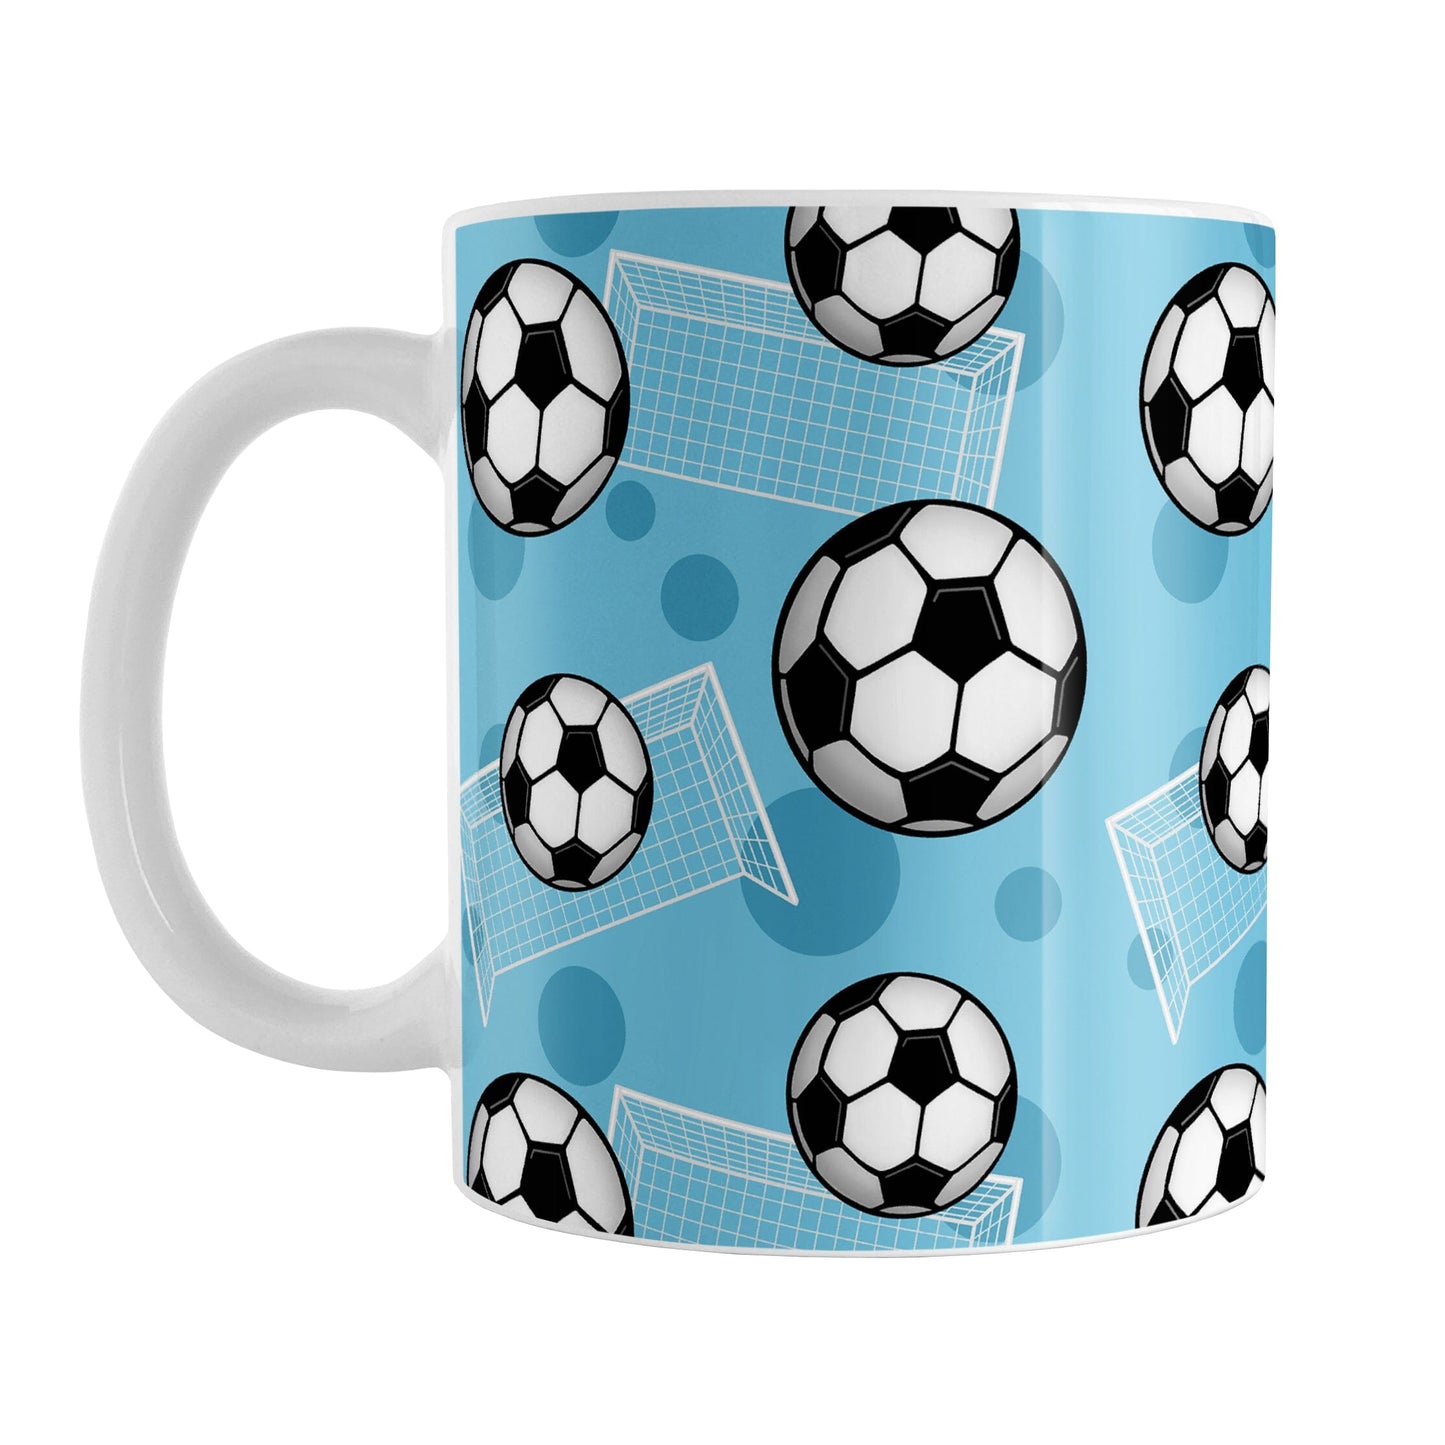 Soccer Ball and Goal Pattern Blue Mug (11oz) at Amy's Coffee Mugs. A ceramic coffee mug designed with a pattern of soccer balls and soccer goals over a blue background color with blue circles. 